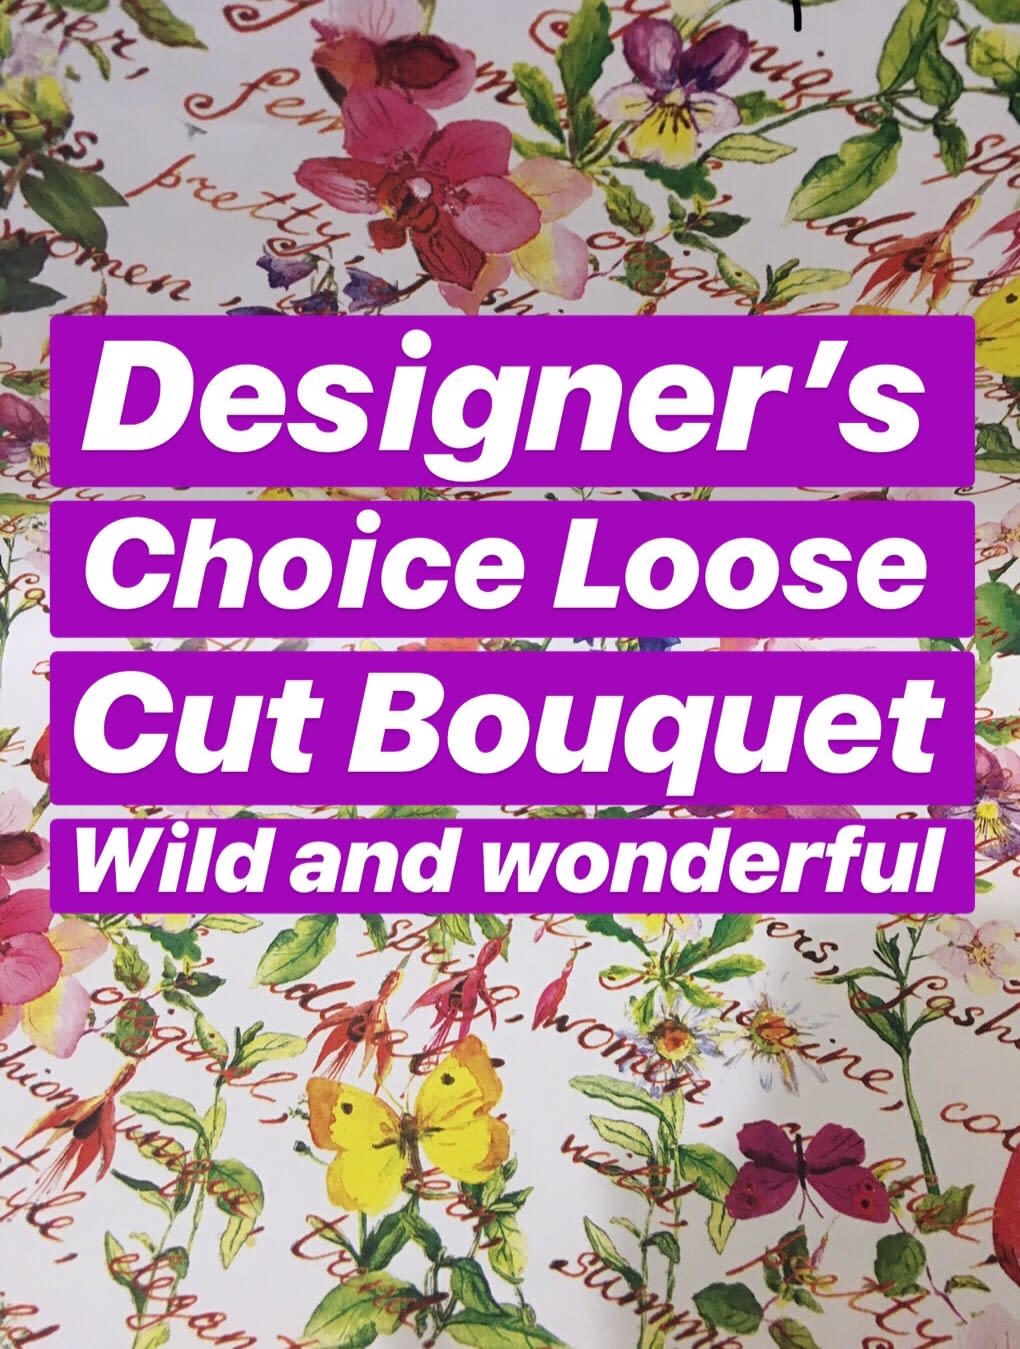 Designer's Choice Loose Cut Bouquet Wild and Wonderful - We will use the freshest flowers available to make a wildflower loose bouquet.  (Does not include vase)